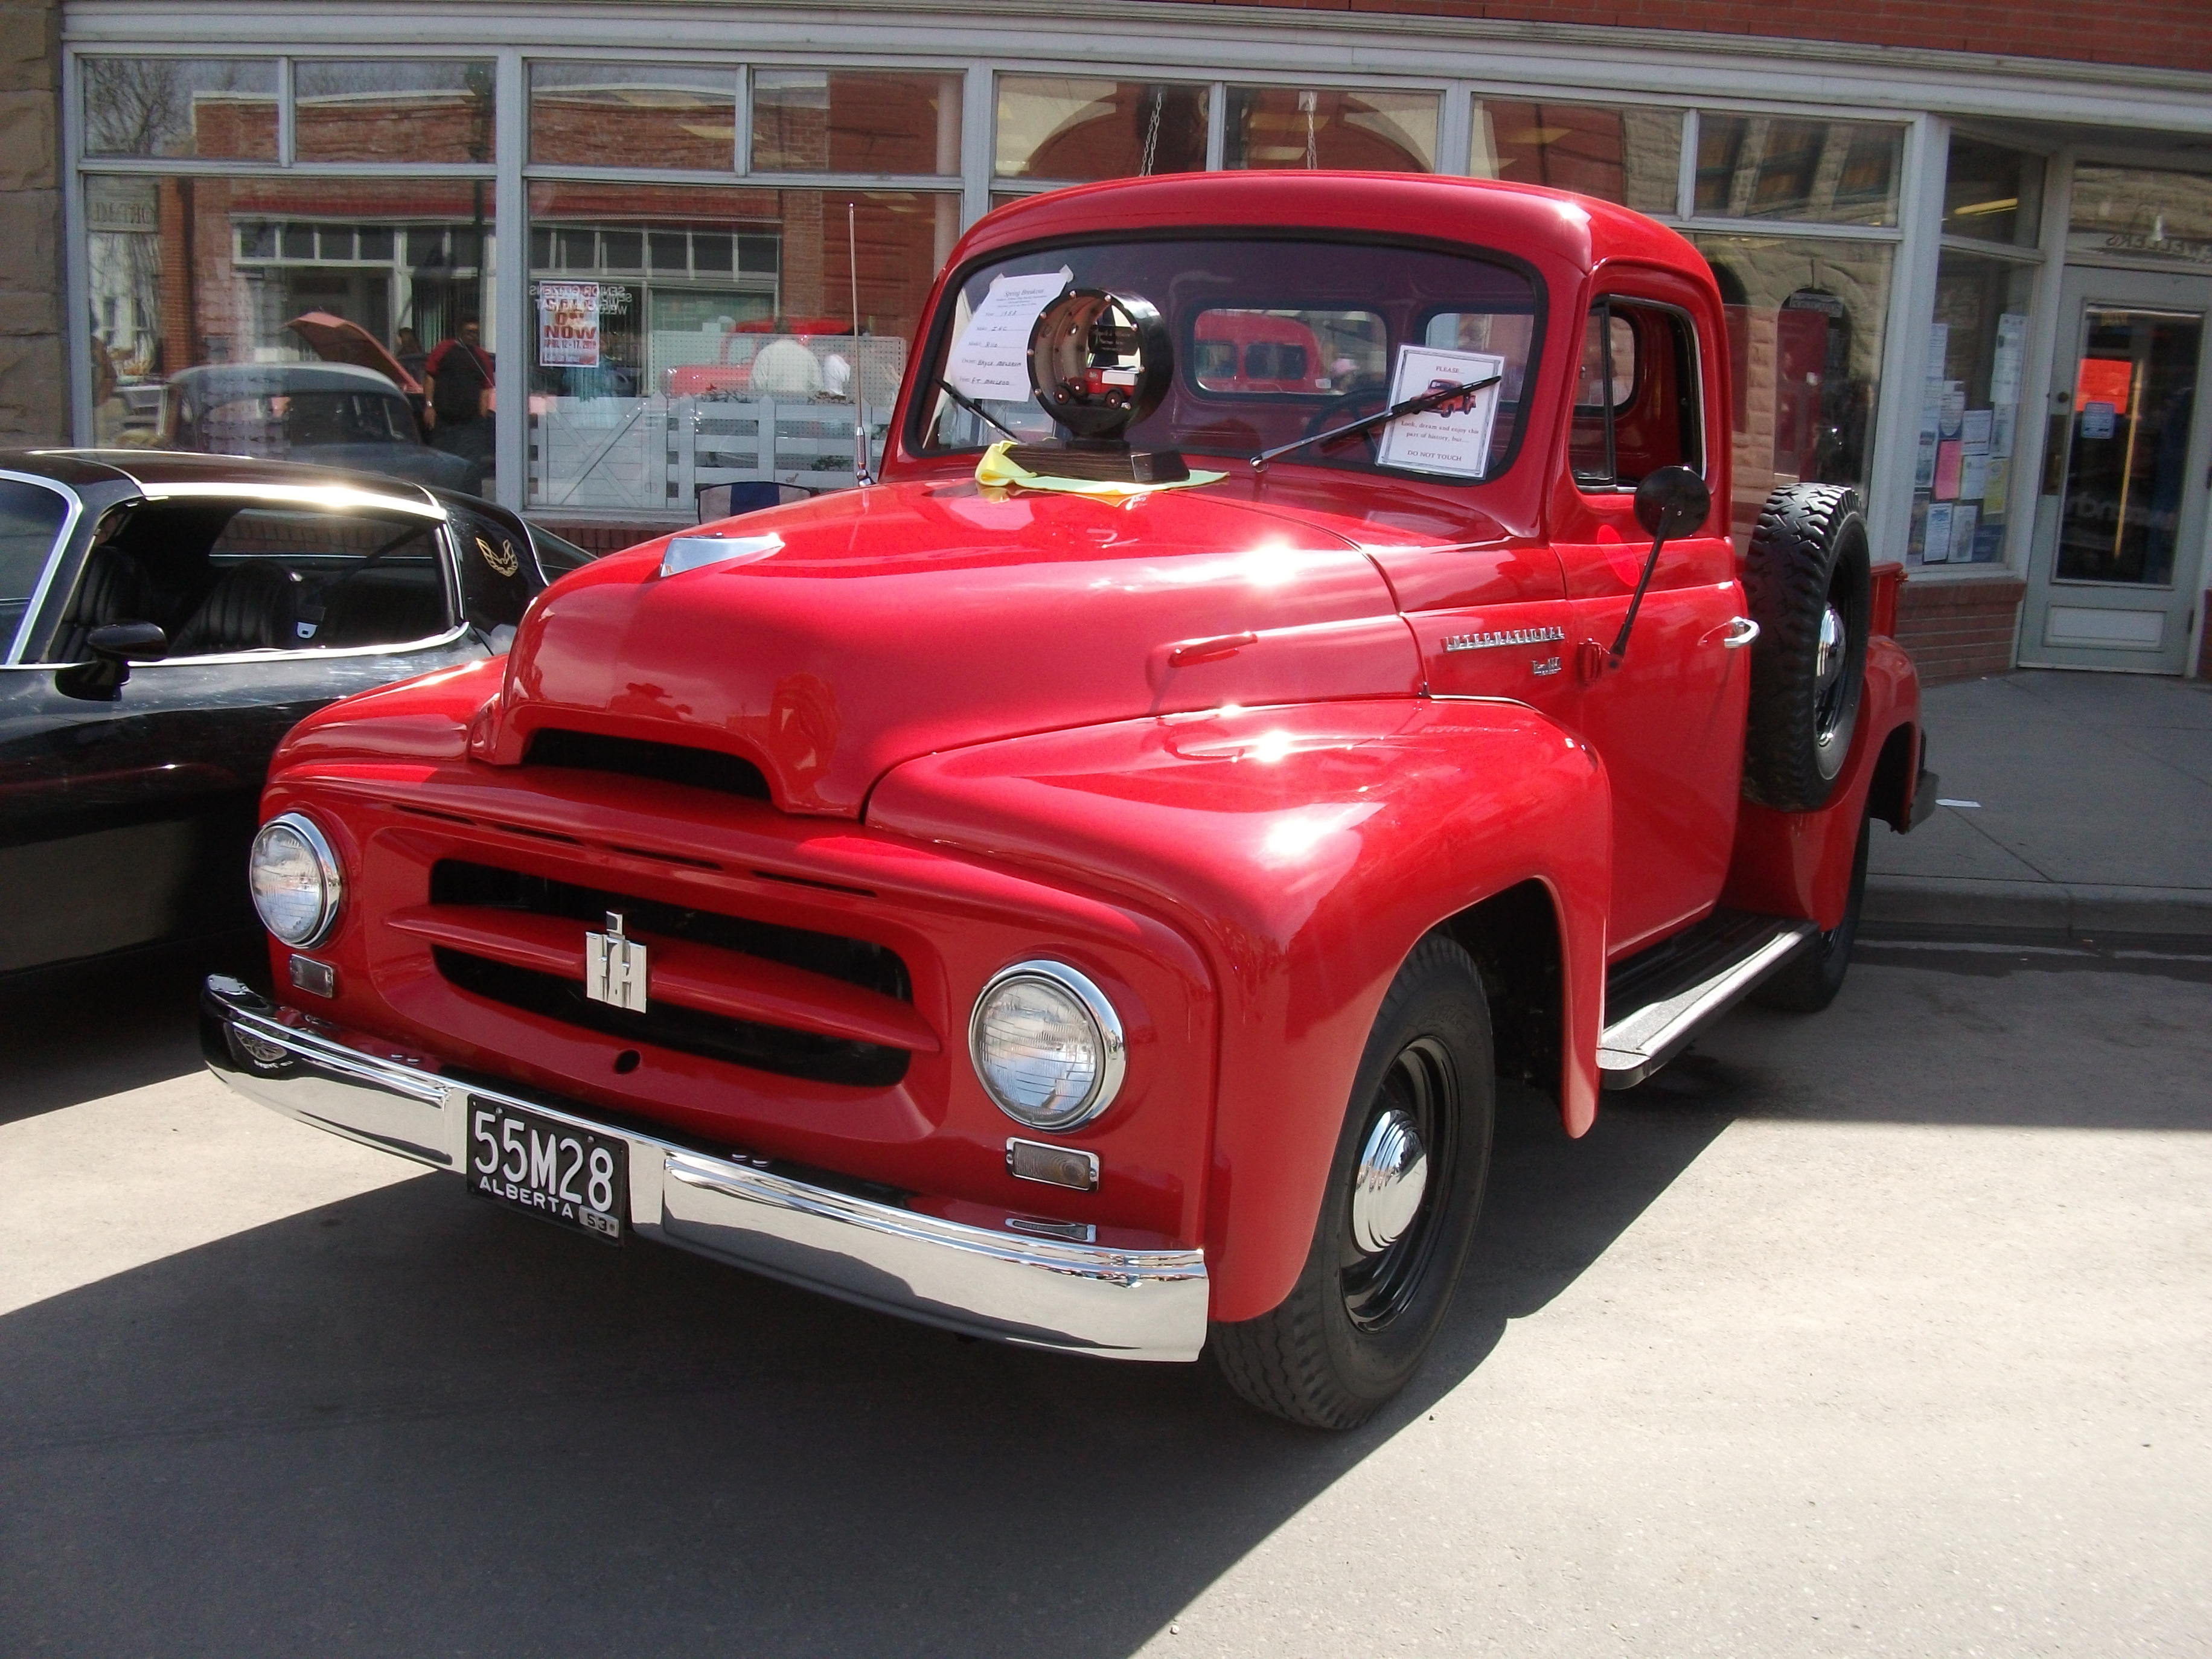 International Harvester R-185 Photo Gallery: Photo #09 out of 11 ...